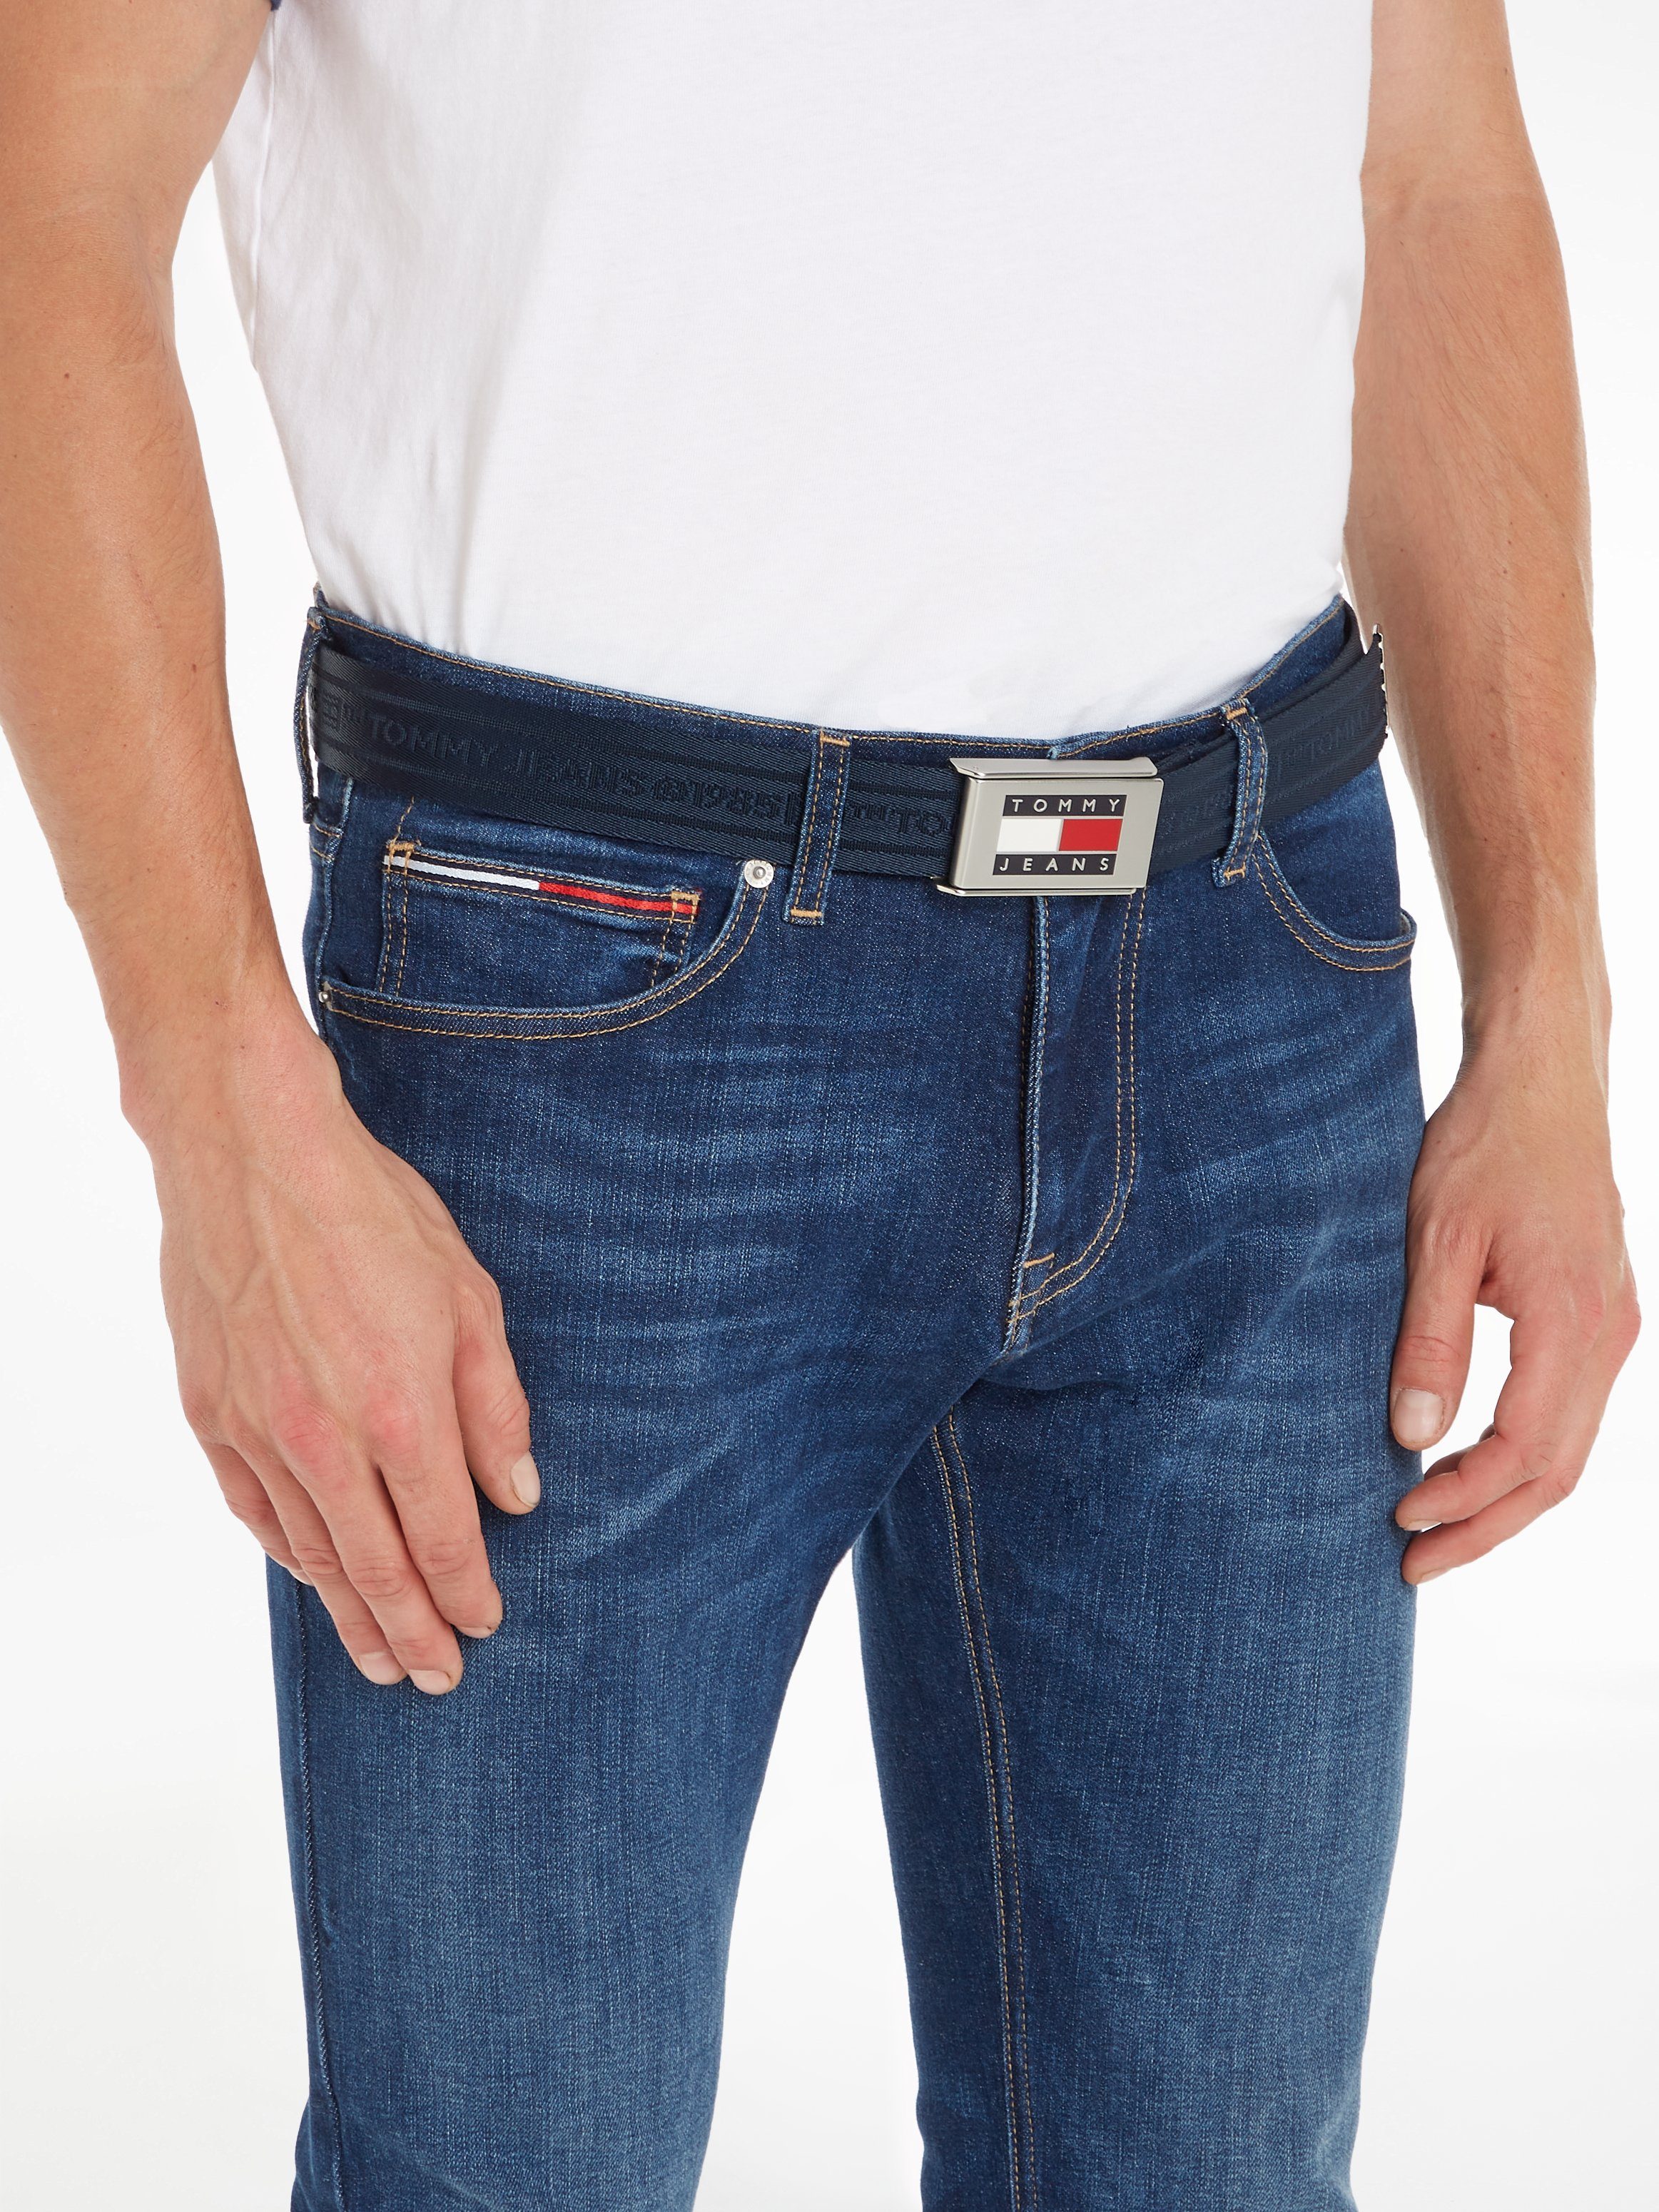 TOMMY JEANS Synthetische riem